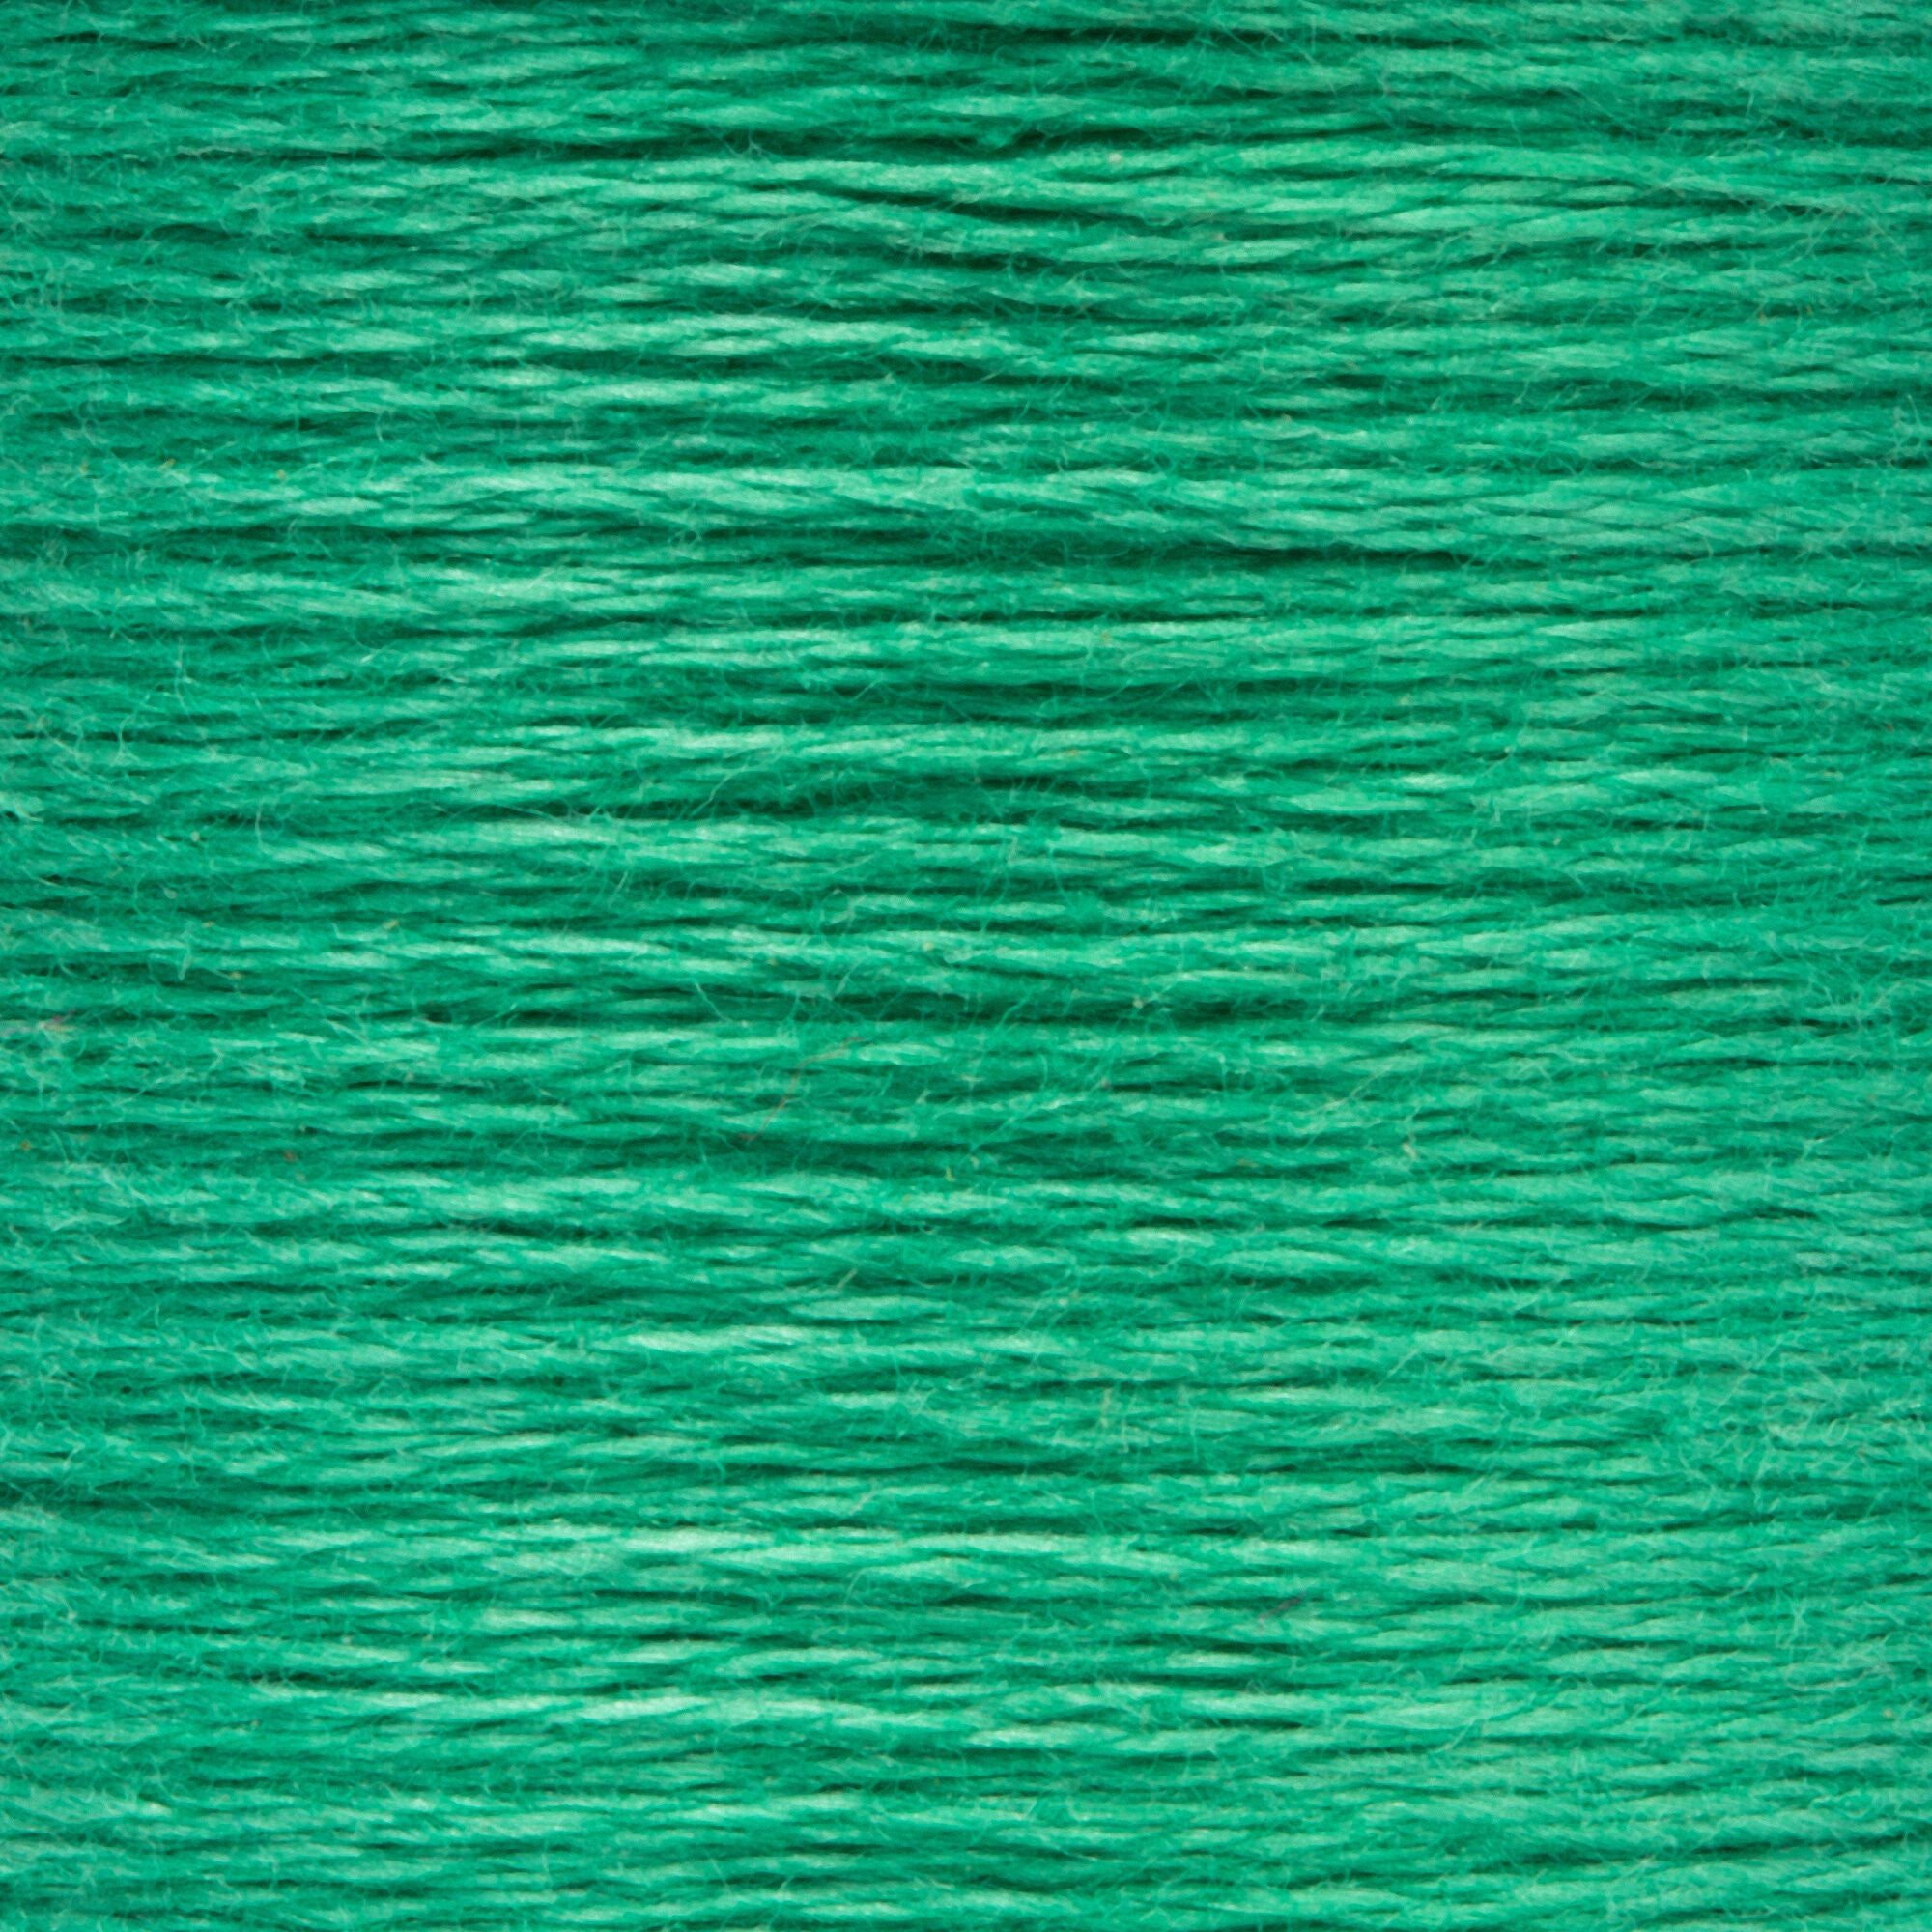 Anchor Embroidery Floss in Mint Green Dk